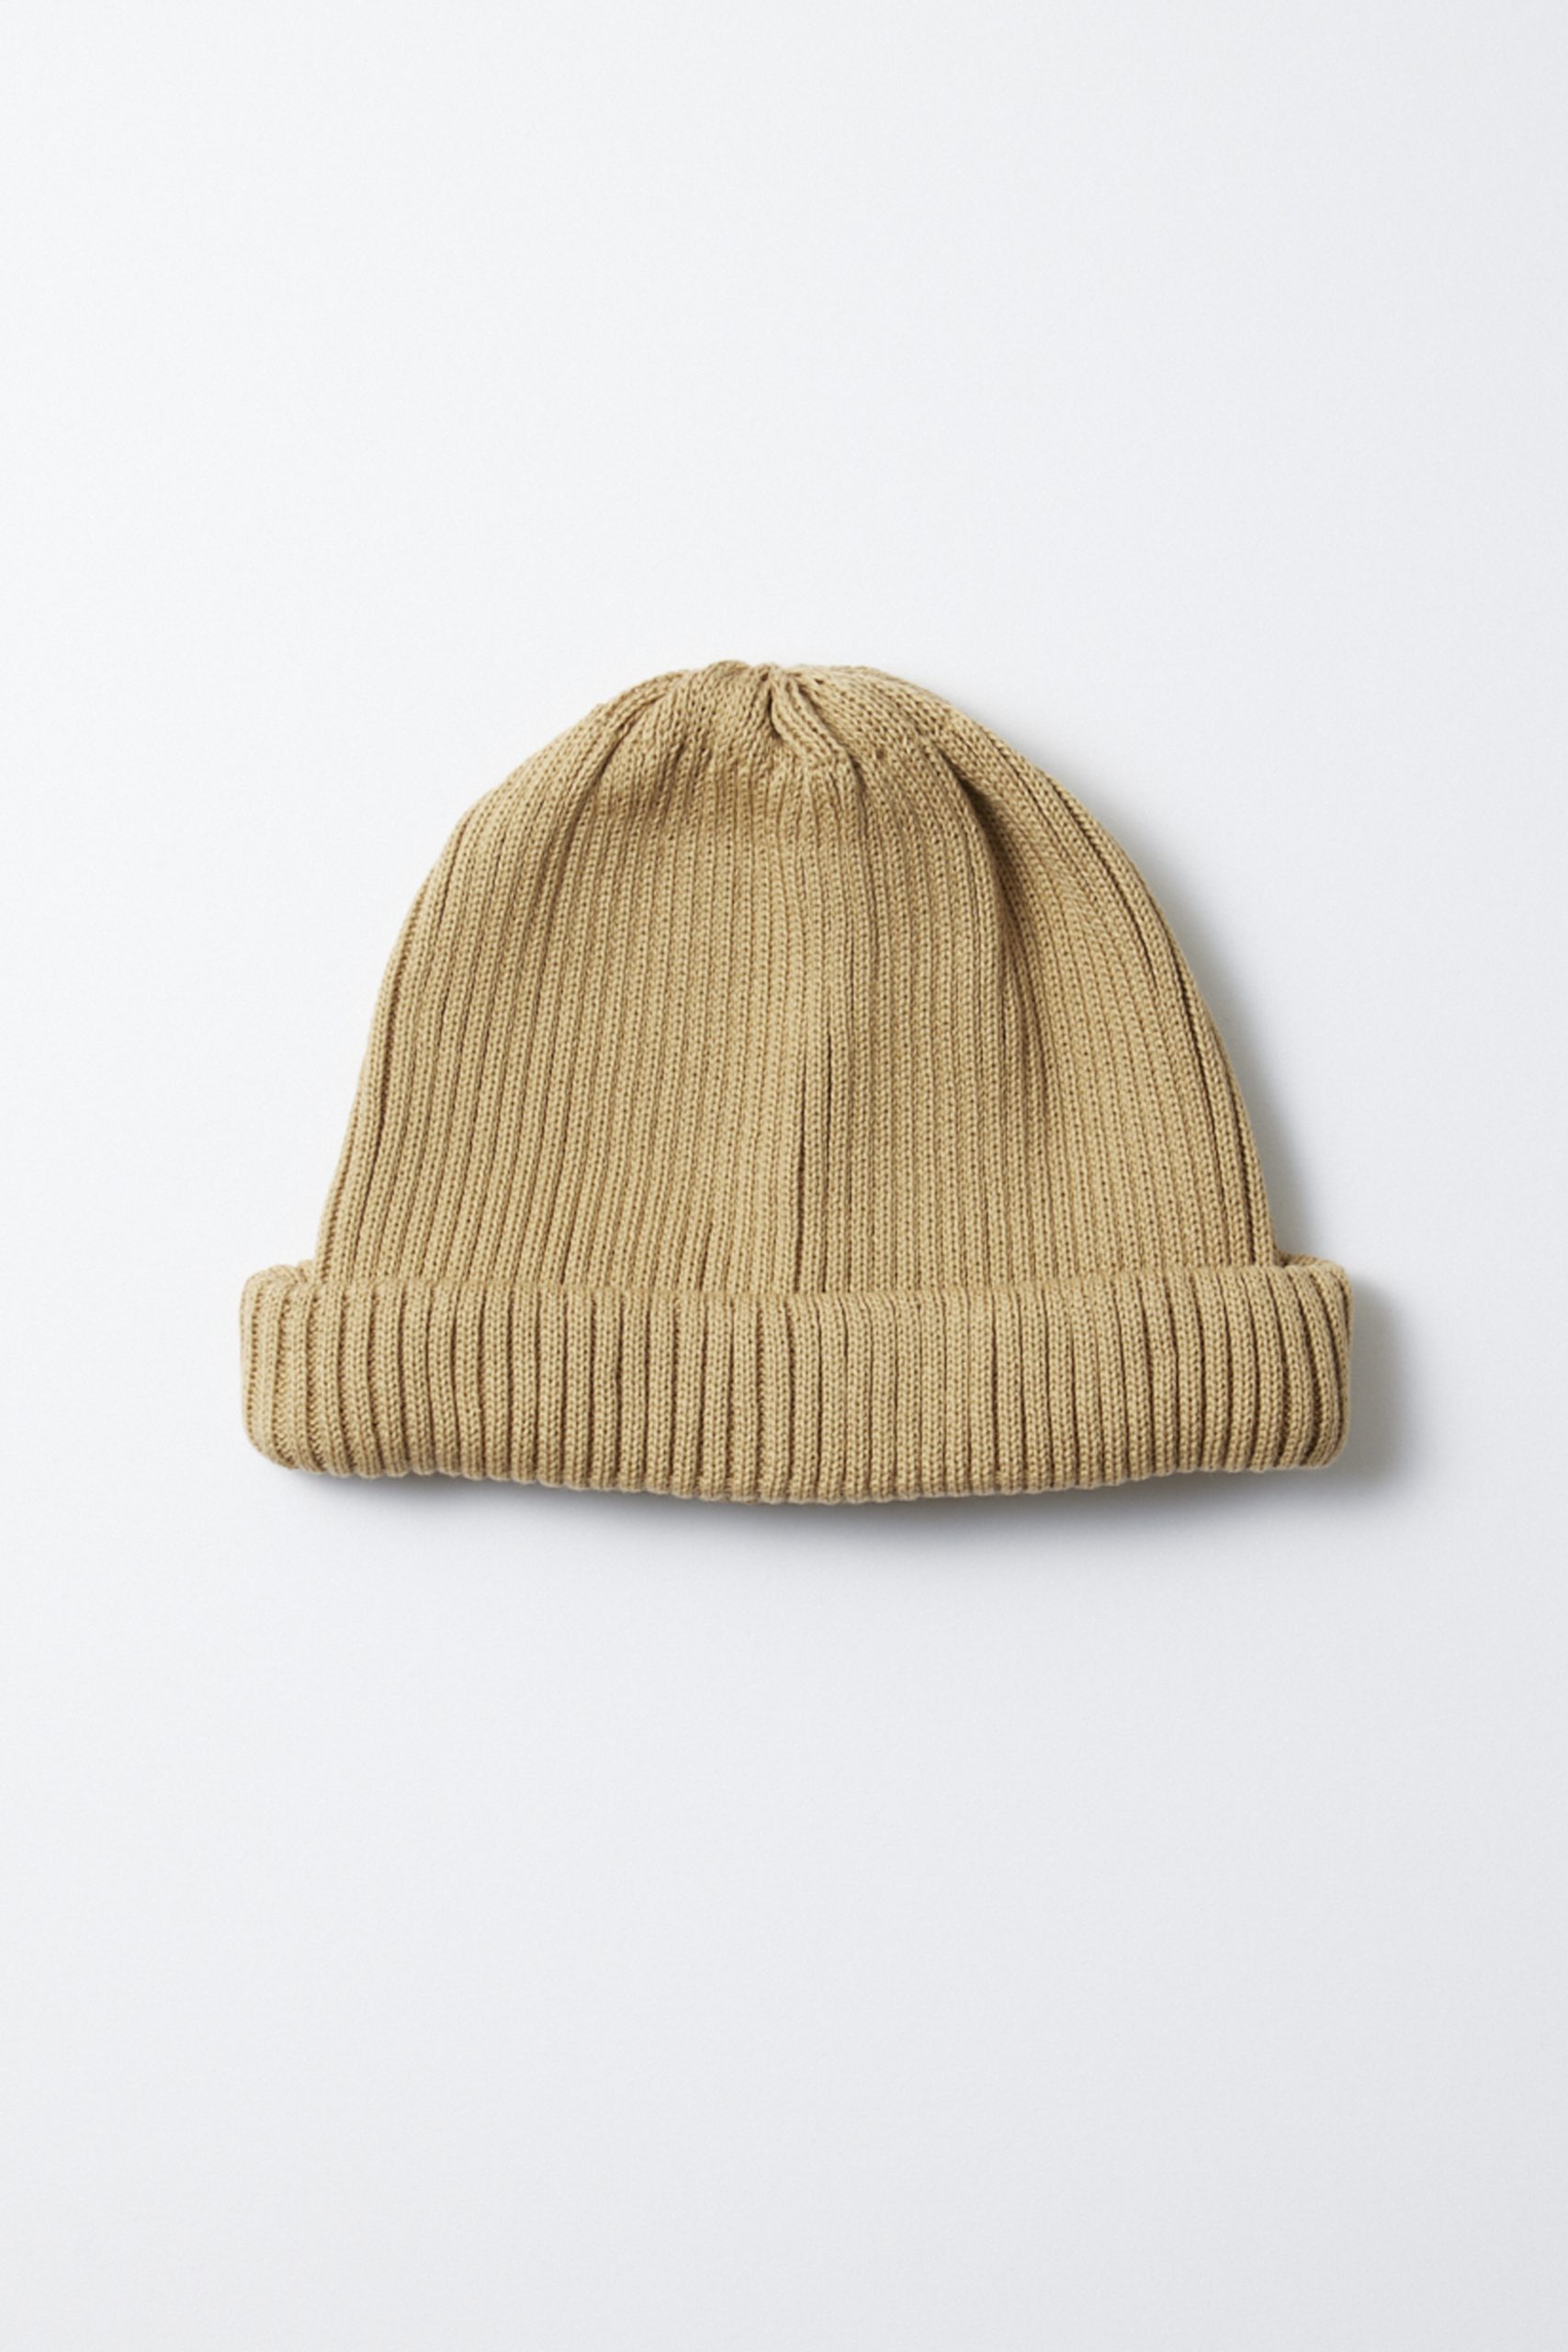 ROTOTO Coton Roll up Beanie Beige